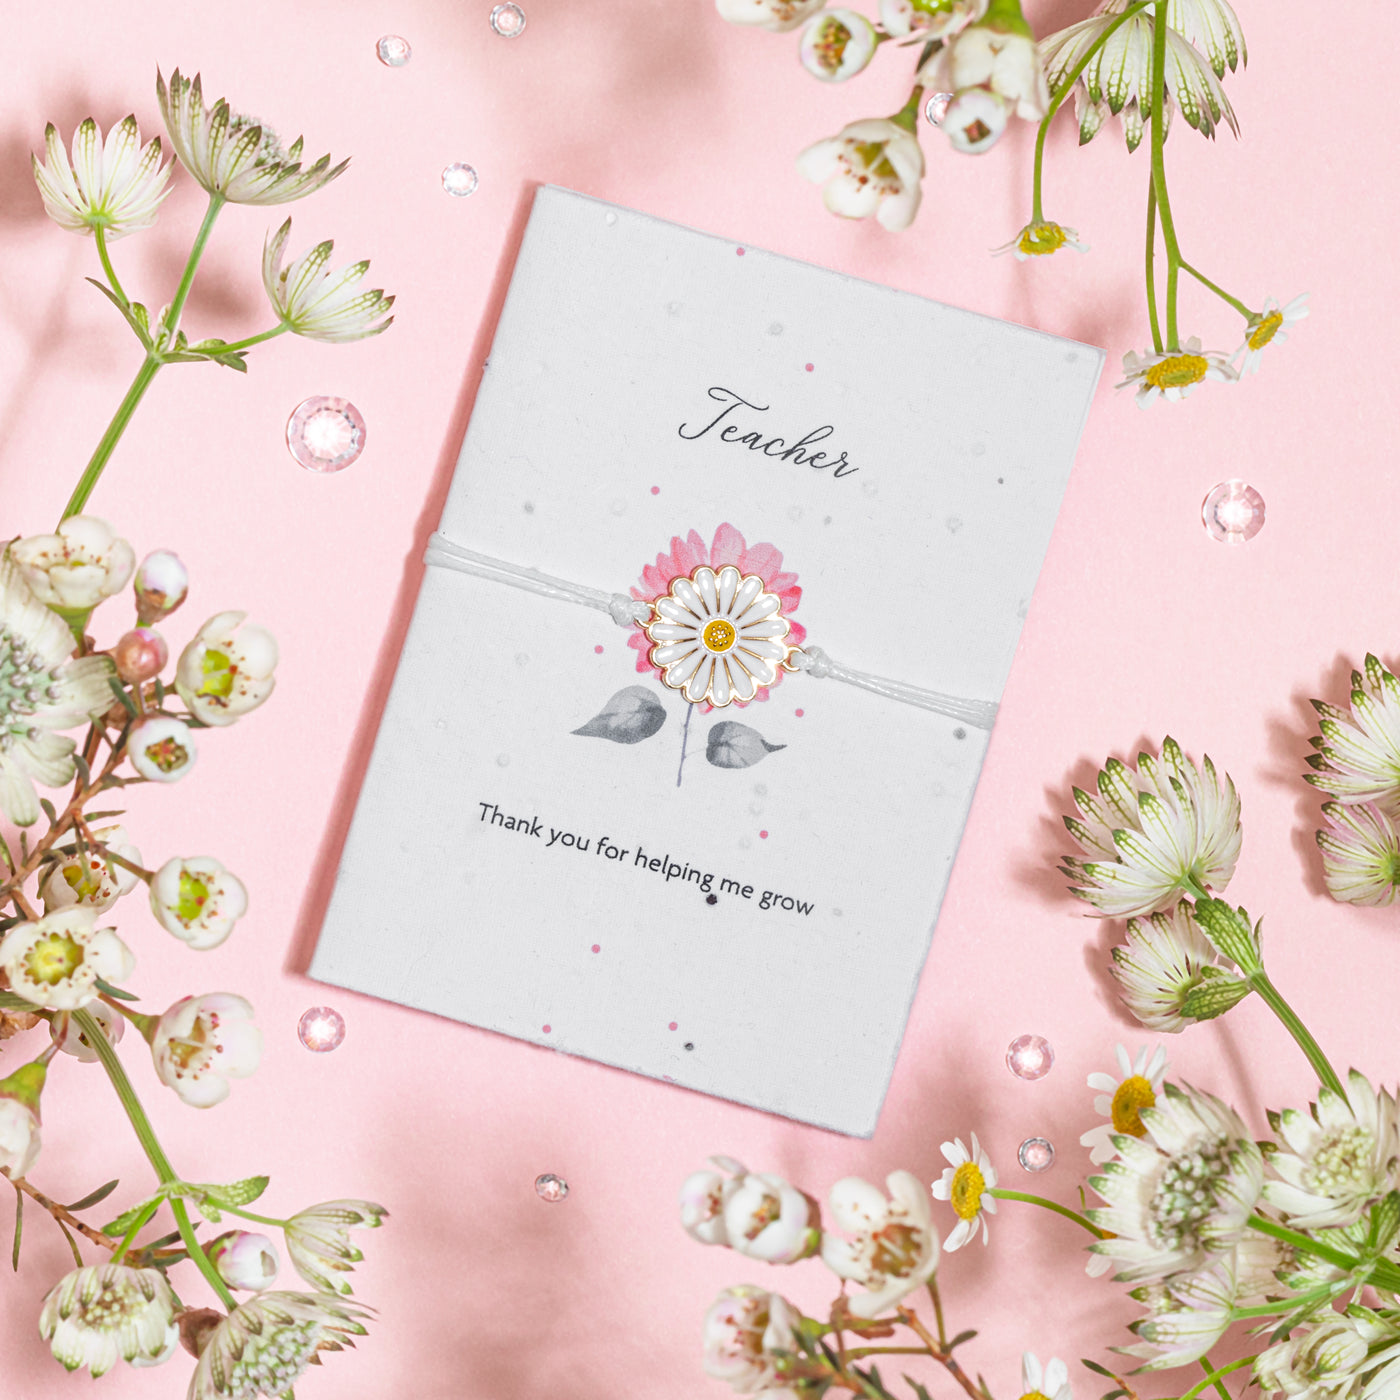 A white daisy charm bracelet elegantly placed on a seed paper greeting card with 